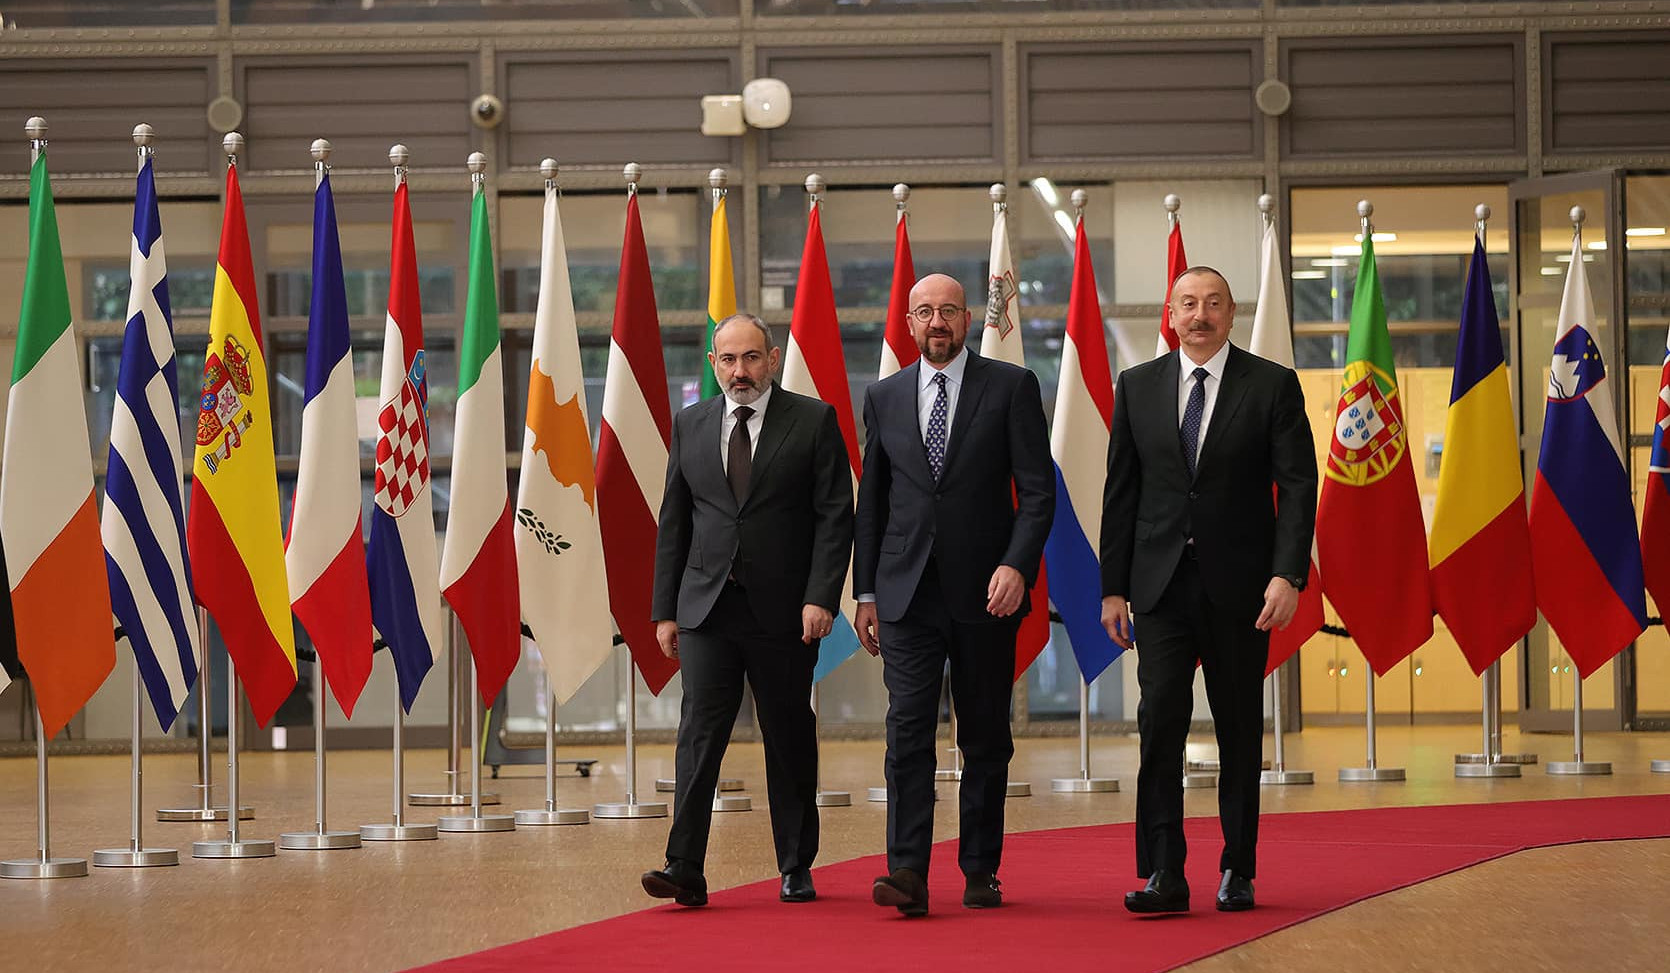 Armenia, Azerbaijan leaders agreed to convene again on 14 May 2023 in a Brussels trilateral meeting, European Council